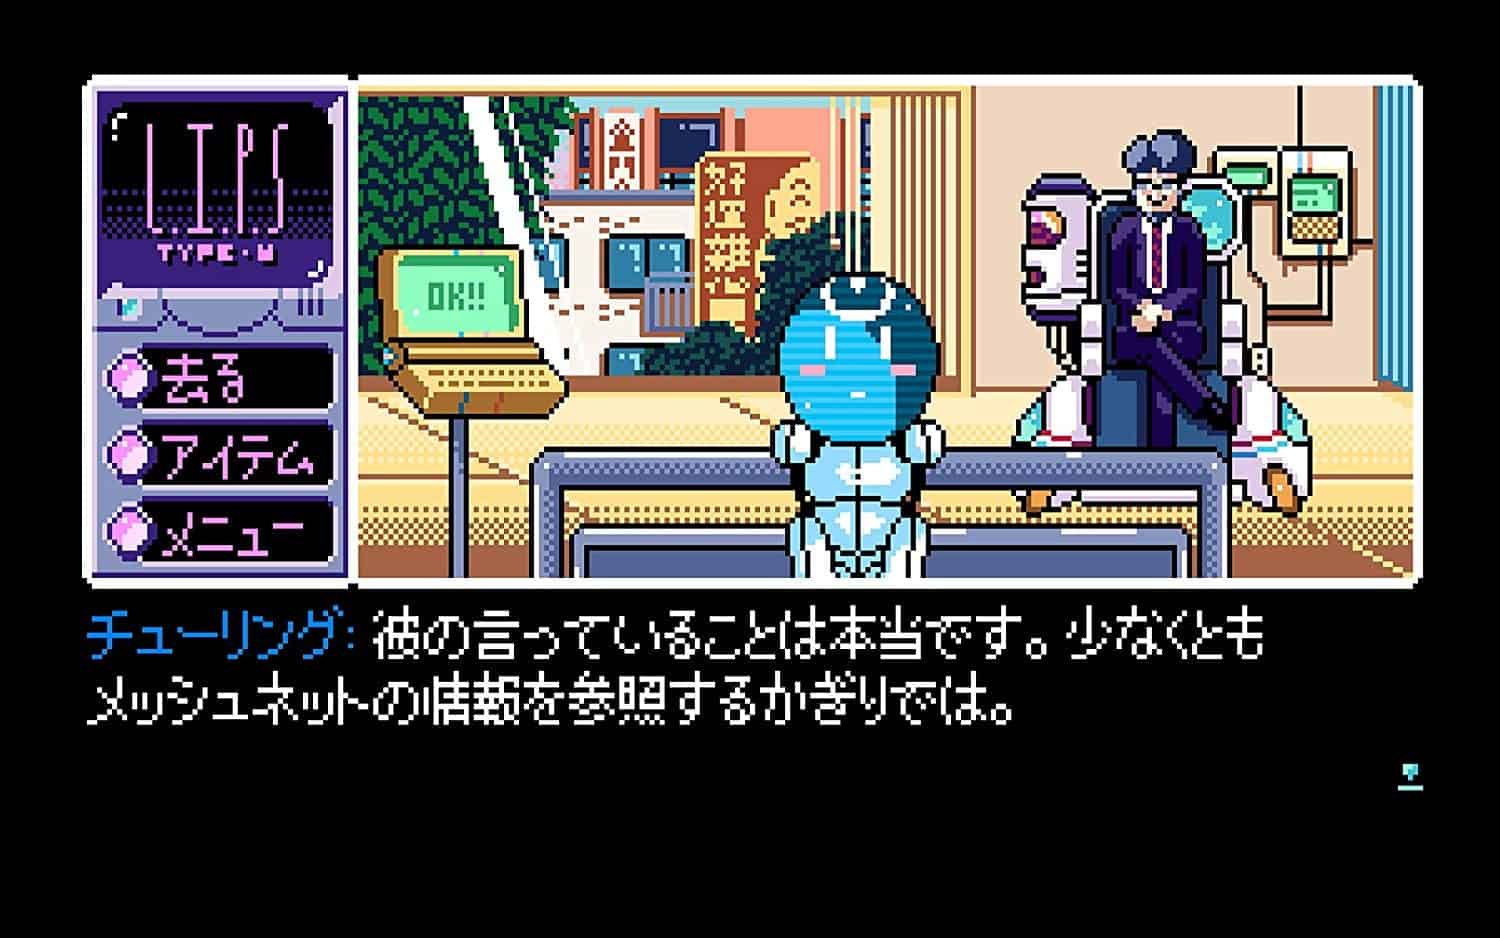 2064: Read Only Memories INTEGRAL, 2064 Read Only Memories INTEGRAL, 2064: ROM INTEGRAL, 2064 ROM INTEGRAL, Chorus Worldwide, Japan, Nintendo Switch, Switch, Price, Pre-order, Features, Screenshots, Physical Release, Retail, Physical Edition